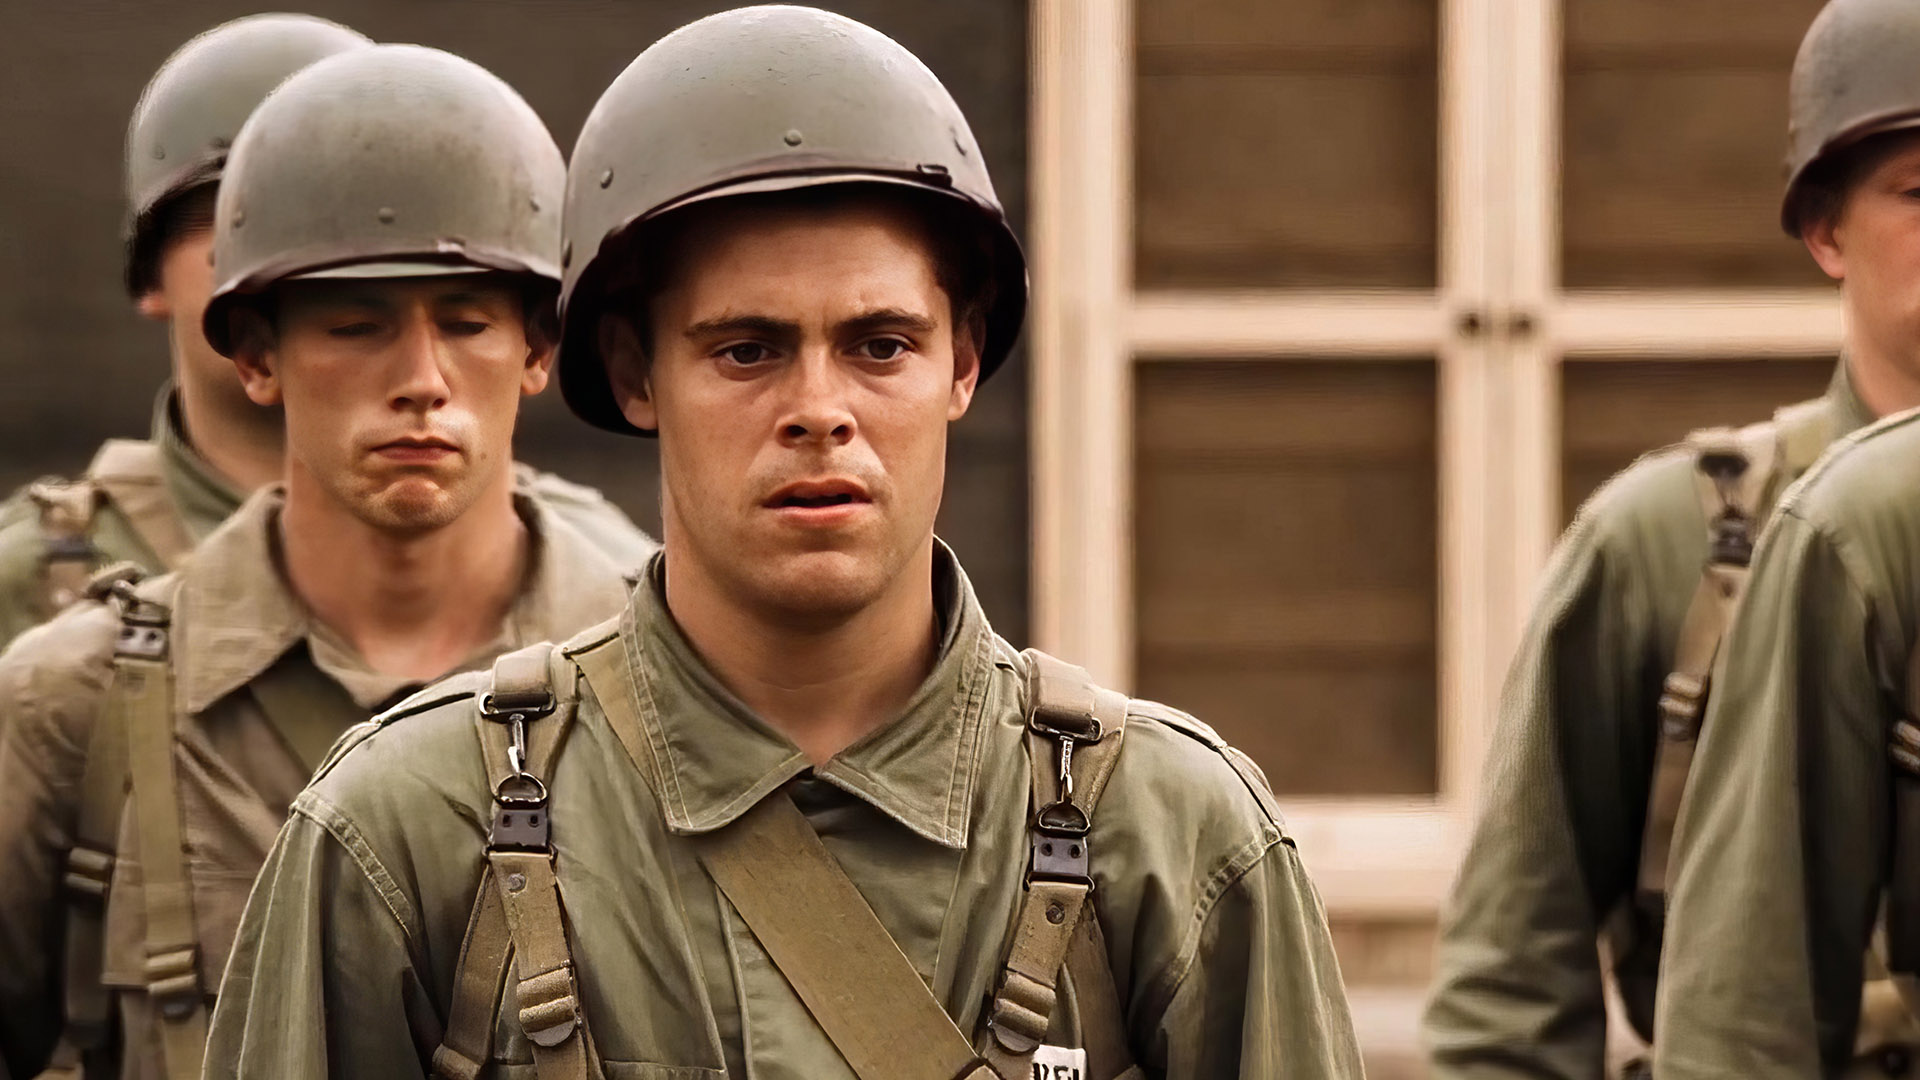 7 WWII Series to Watch on Netflix After Band of Brothers